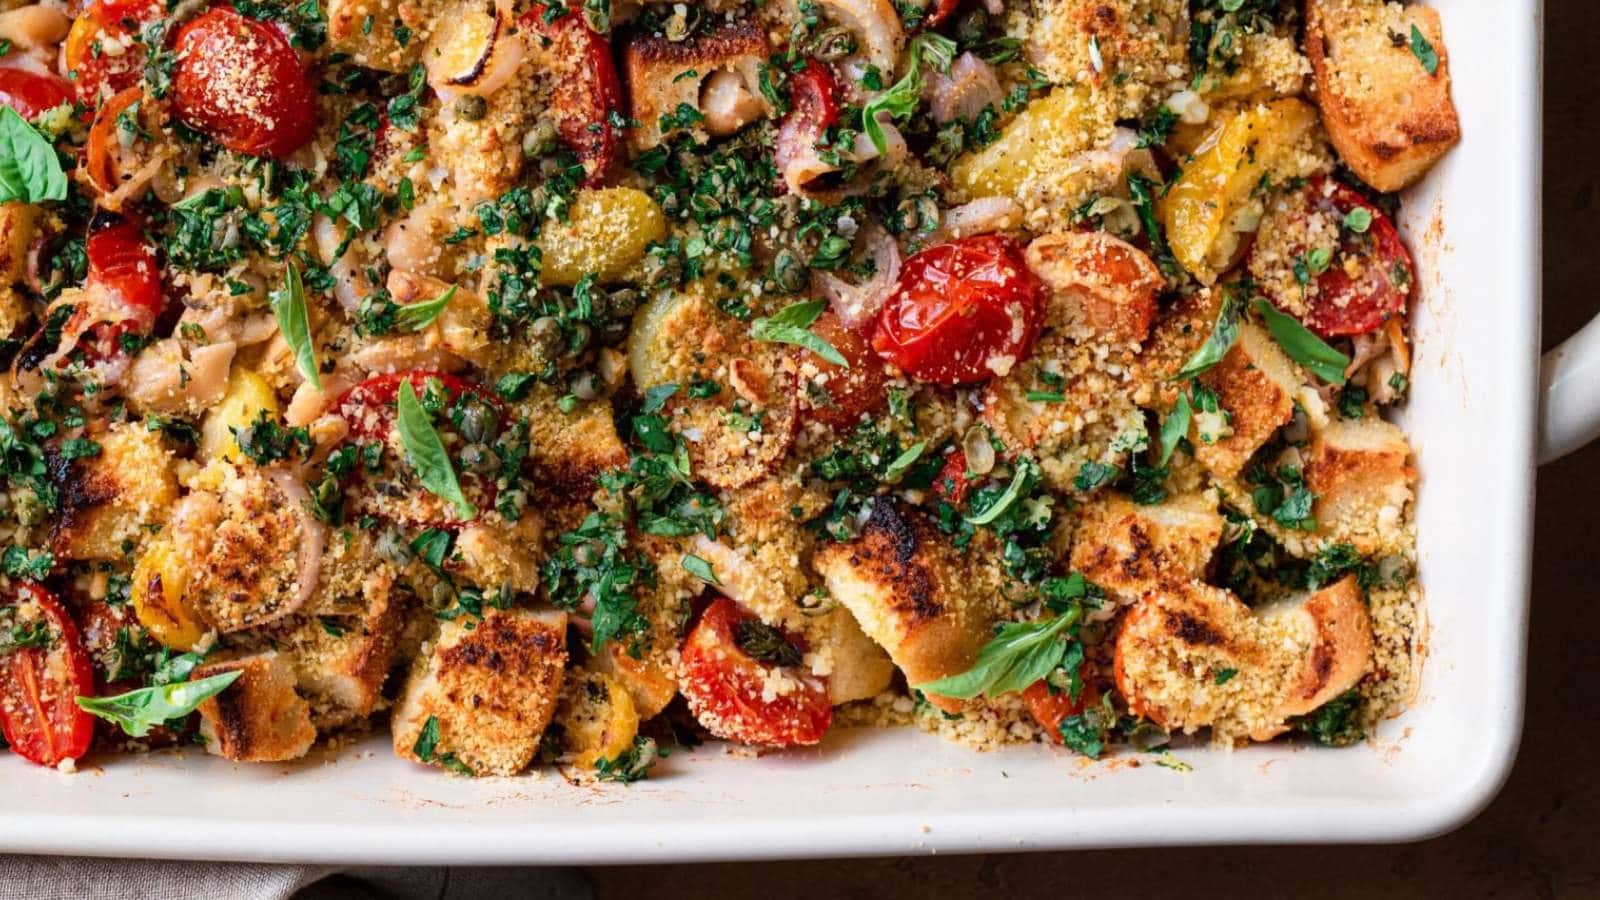 <p>When warmer weather is on the horizon, I love introducing lighter dishes into the rotation, like this Tomato and White Bean Casserole. Think of it as a Panzanella salad but in casserole form (Panzanella is an Italian tomato and bread salad).</p><p><strong>Get the Recipe: <a href="https://rainbowplantlife.com/tomato-and-white-bean-casserole/" rel="noreferrer noopener">Tomato and White Bean Casserole</a></strong></p>